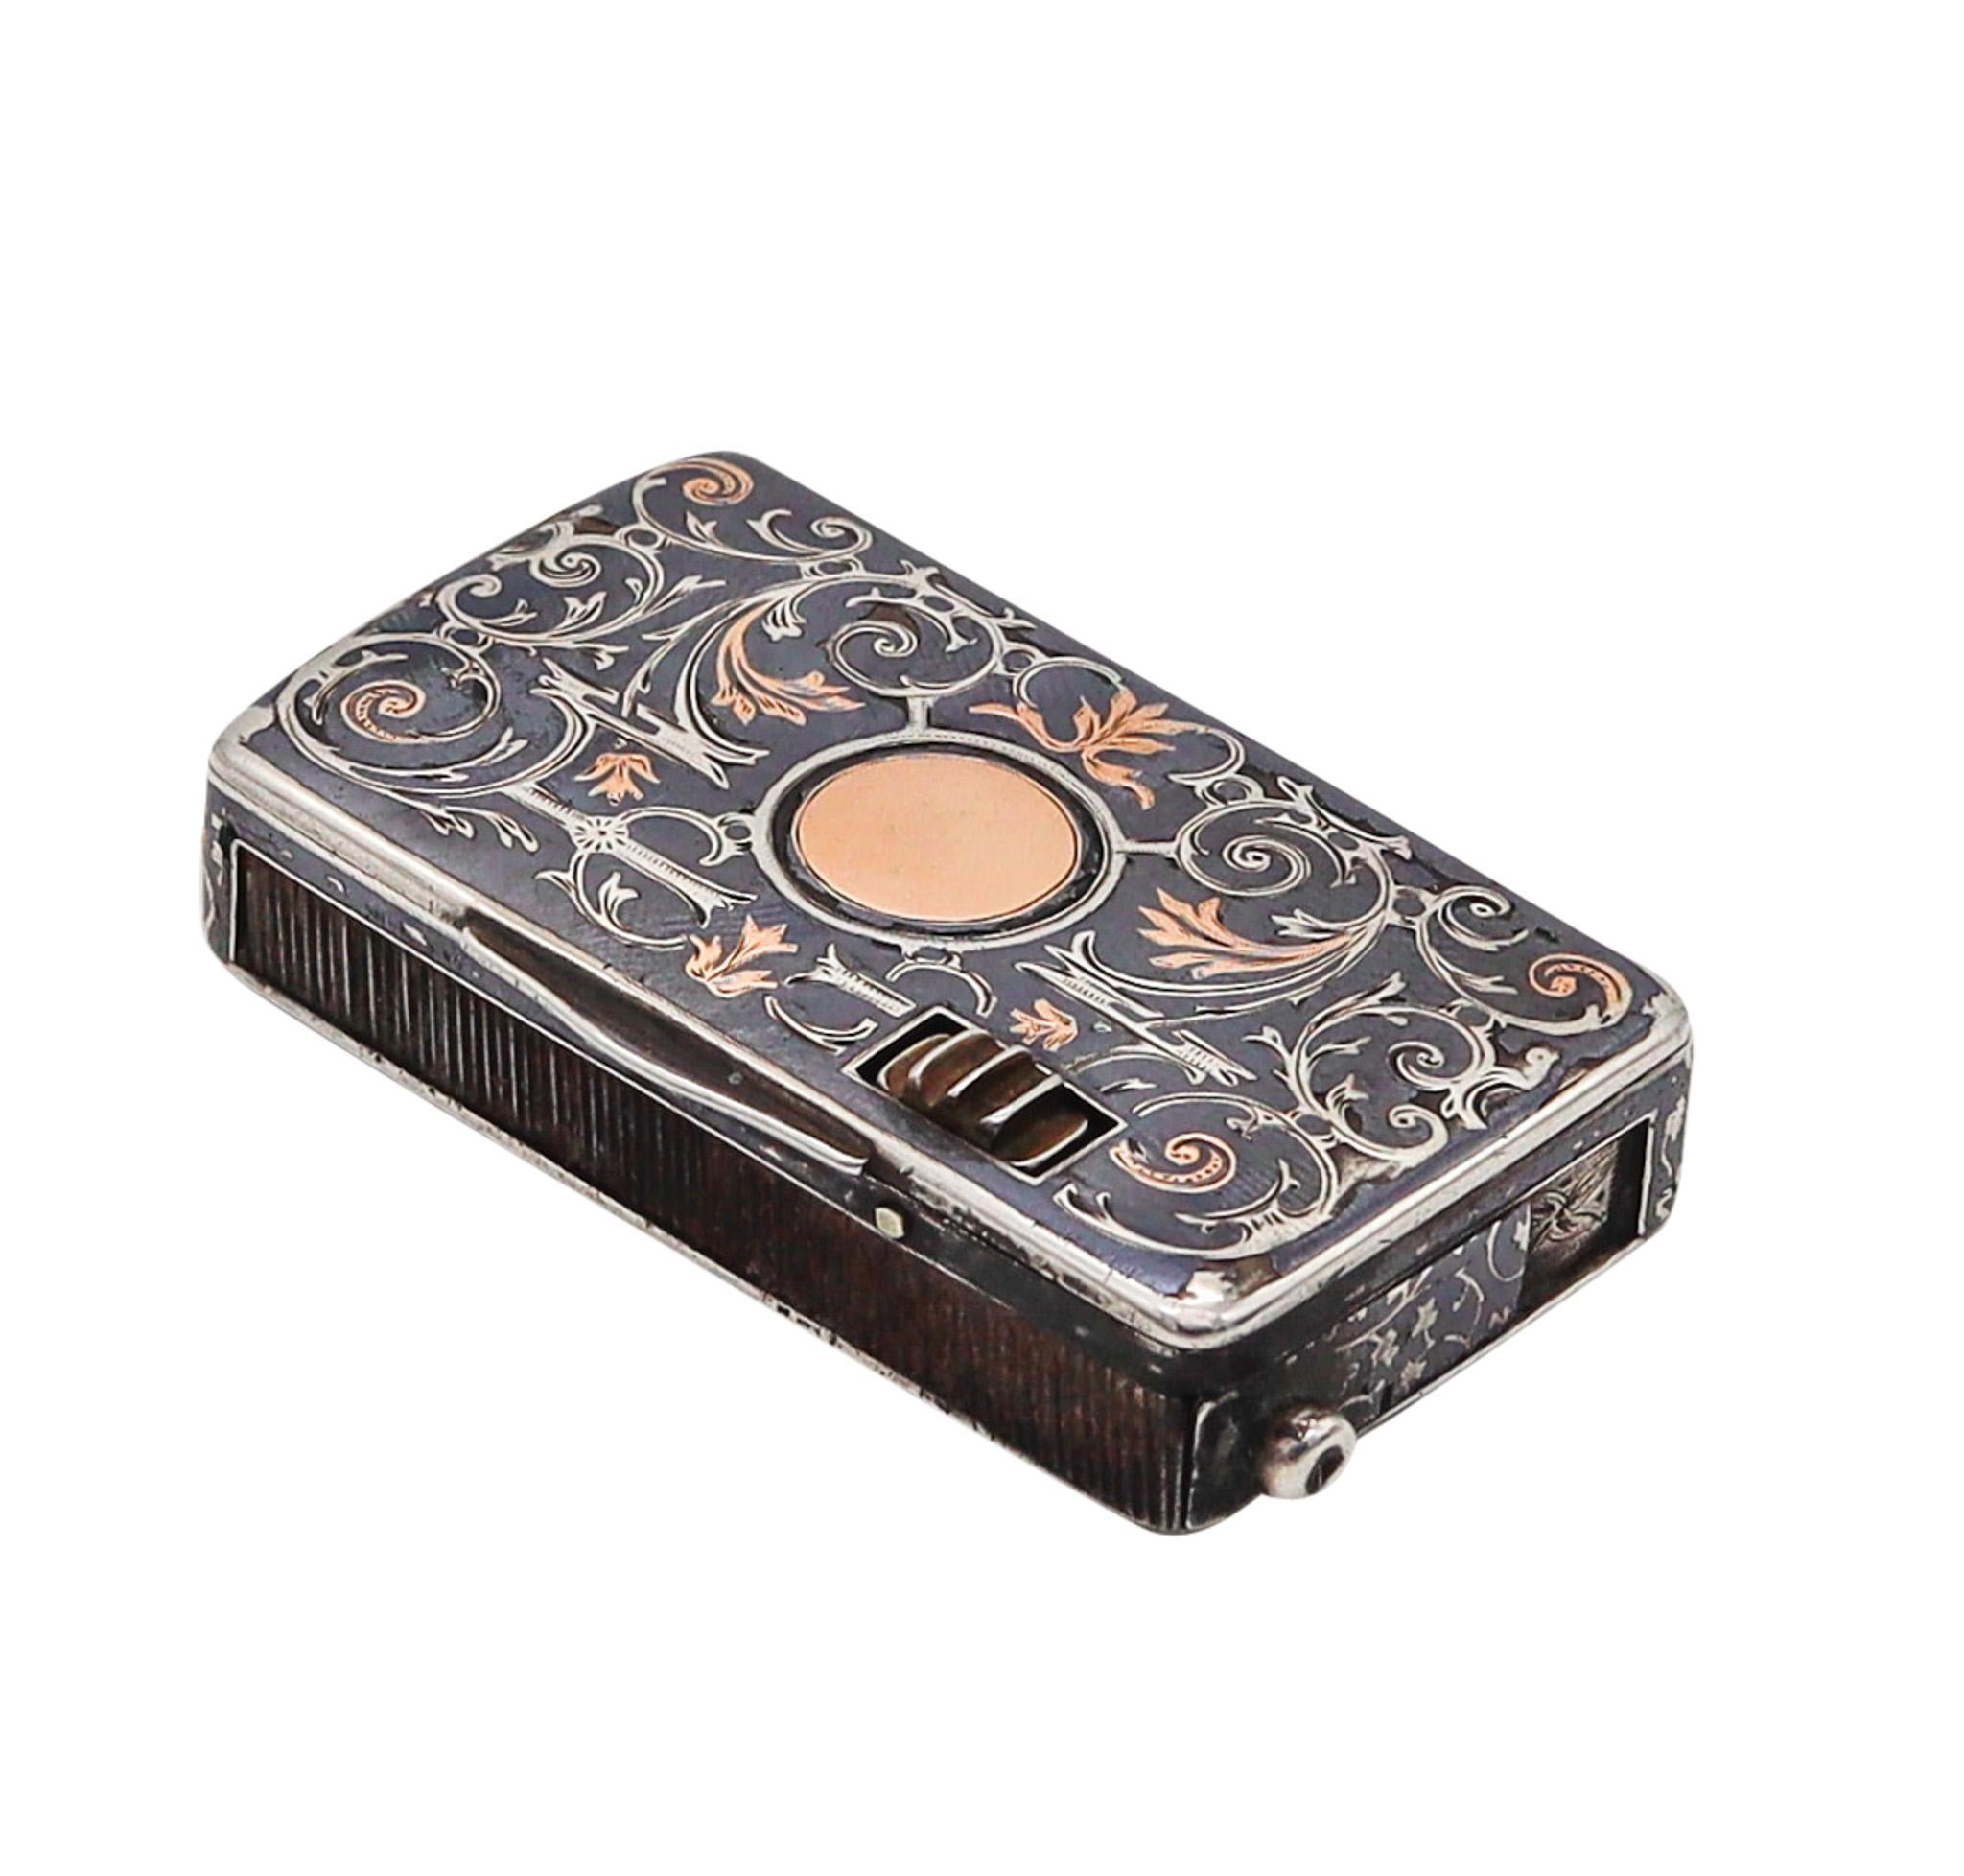 Austro-Hungarian empire mechanical vesta tinder case made by Karl Rössler

Beautiful antique fusee vesta tinder case, created in Vienna Austria around the 1890. It was crafted at the workshop of Karl Rössler, during the Austro-Hungarian empire